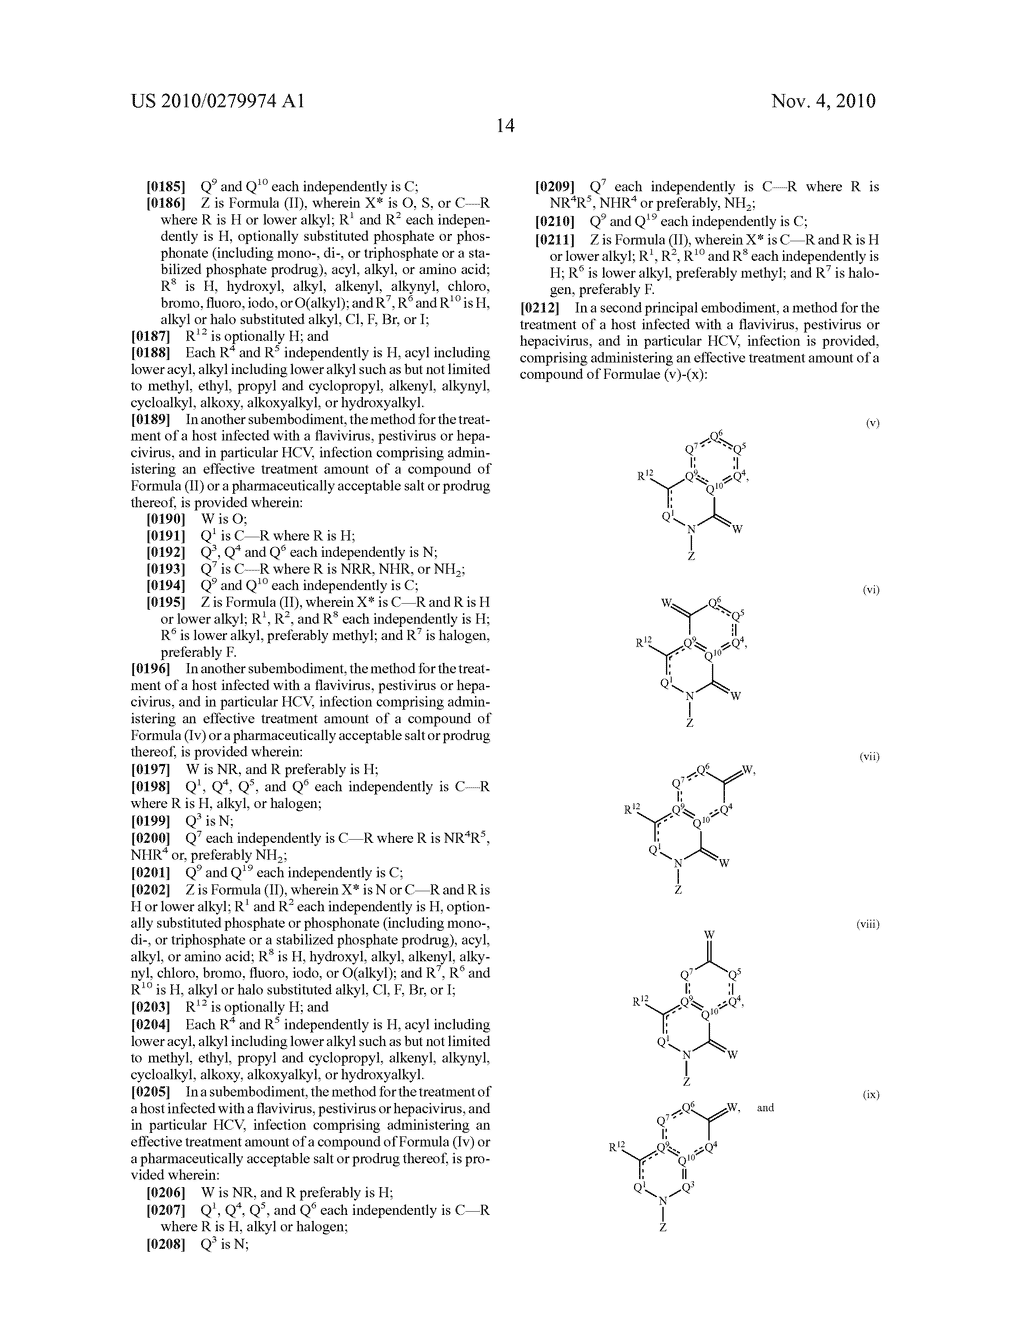 Nucleosides With Non-Natural Bases as Anti-Viral Agents - diagram, schematic, and image 18